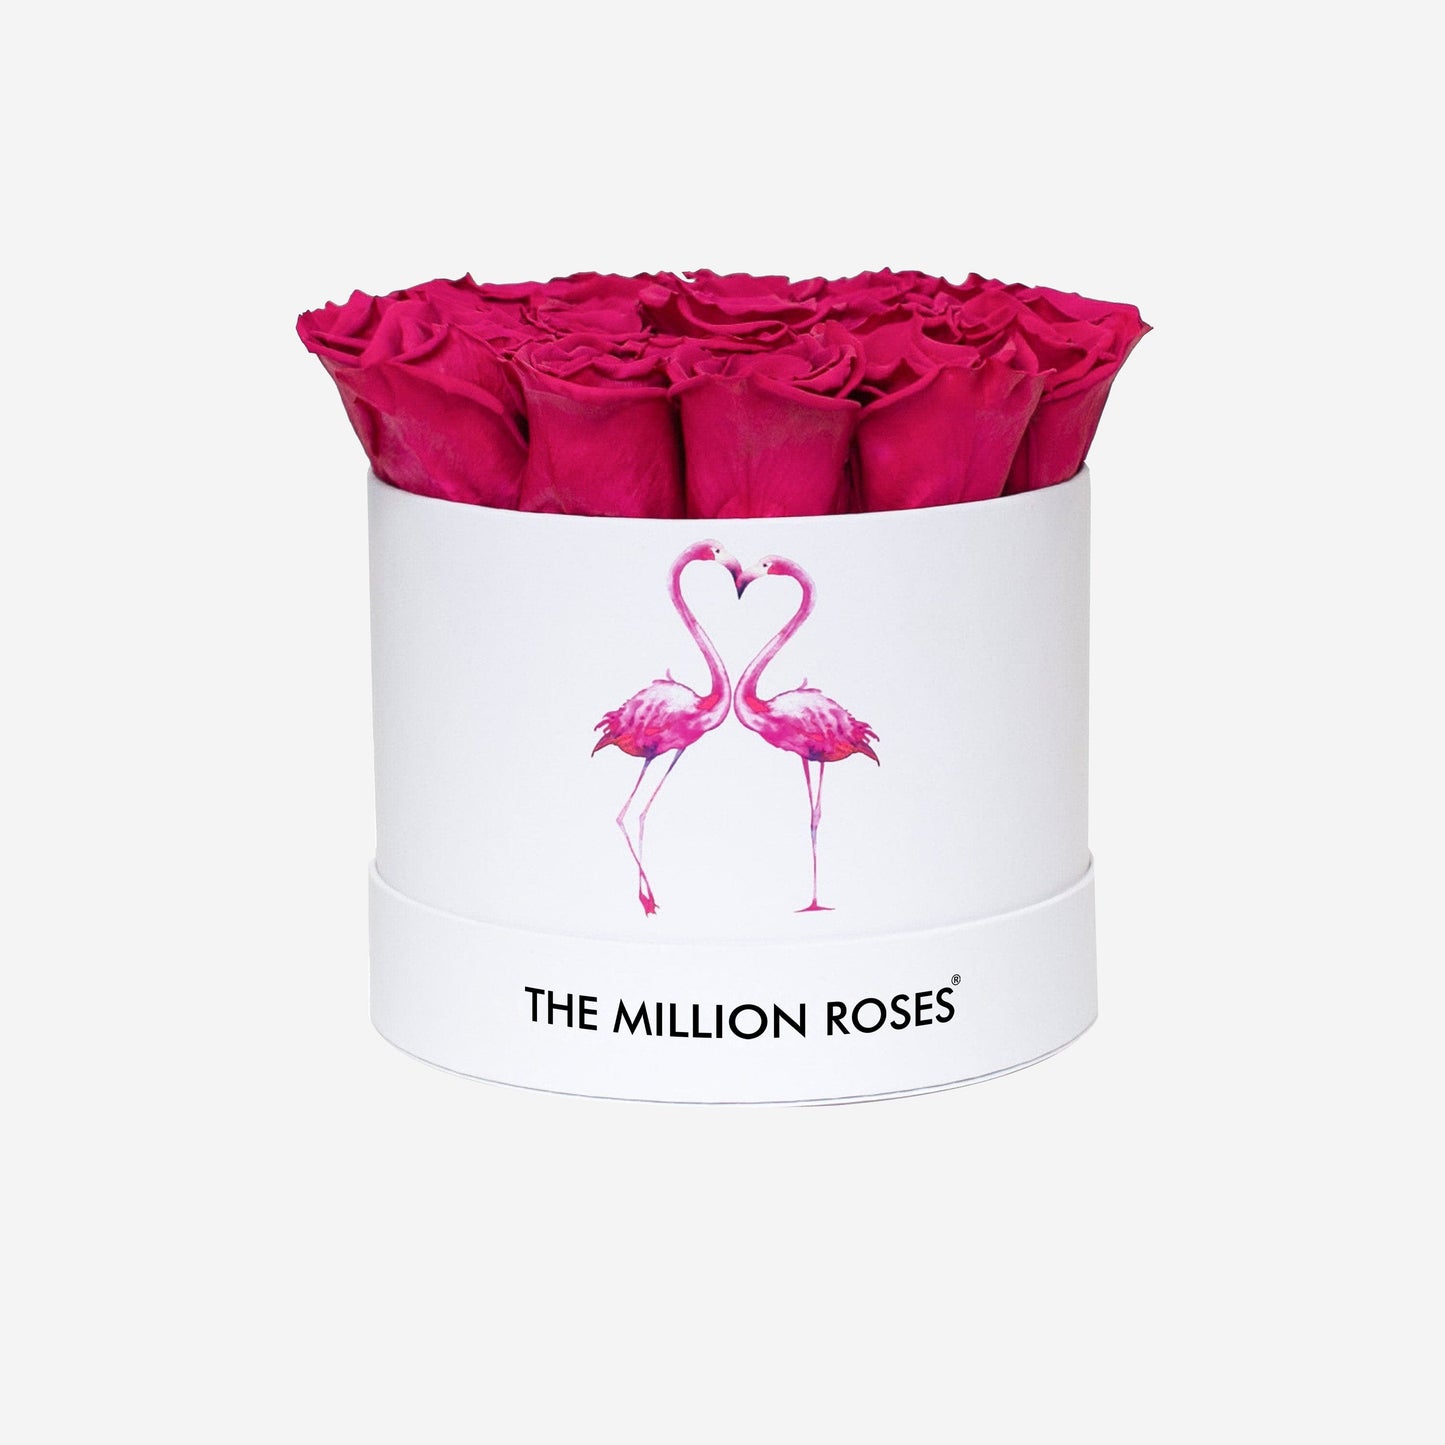 Classic White Box | Flamingo Edition | Hot Pink Roses - The Million Roses